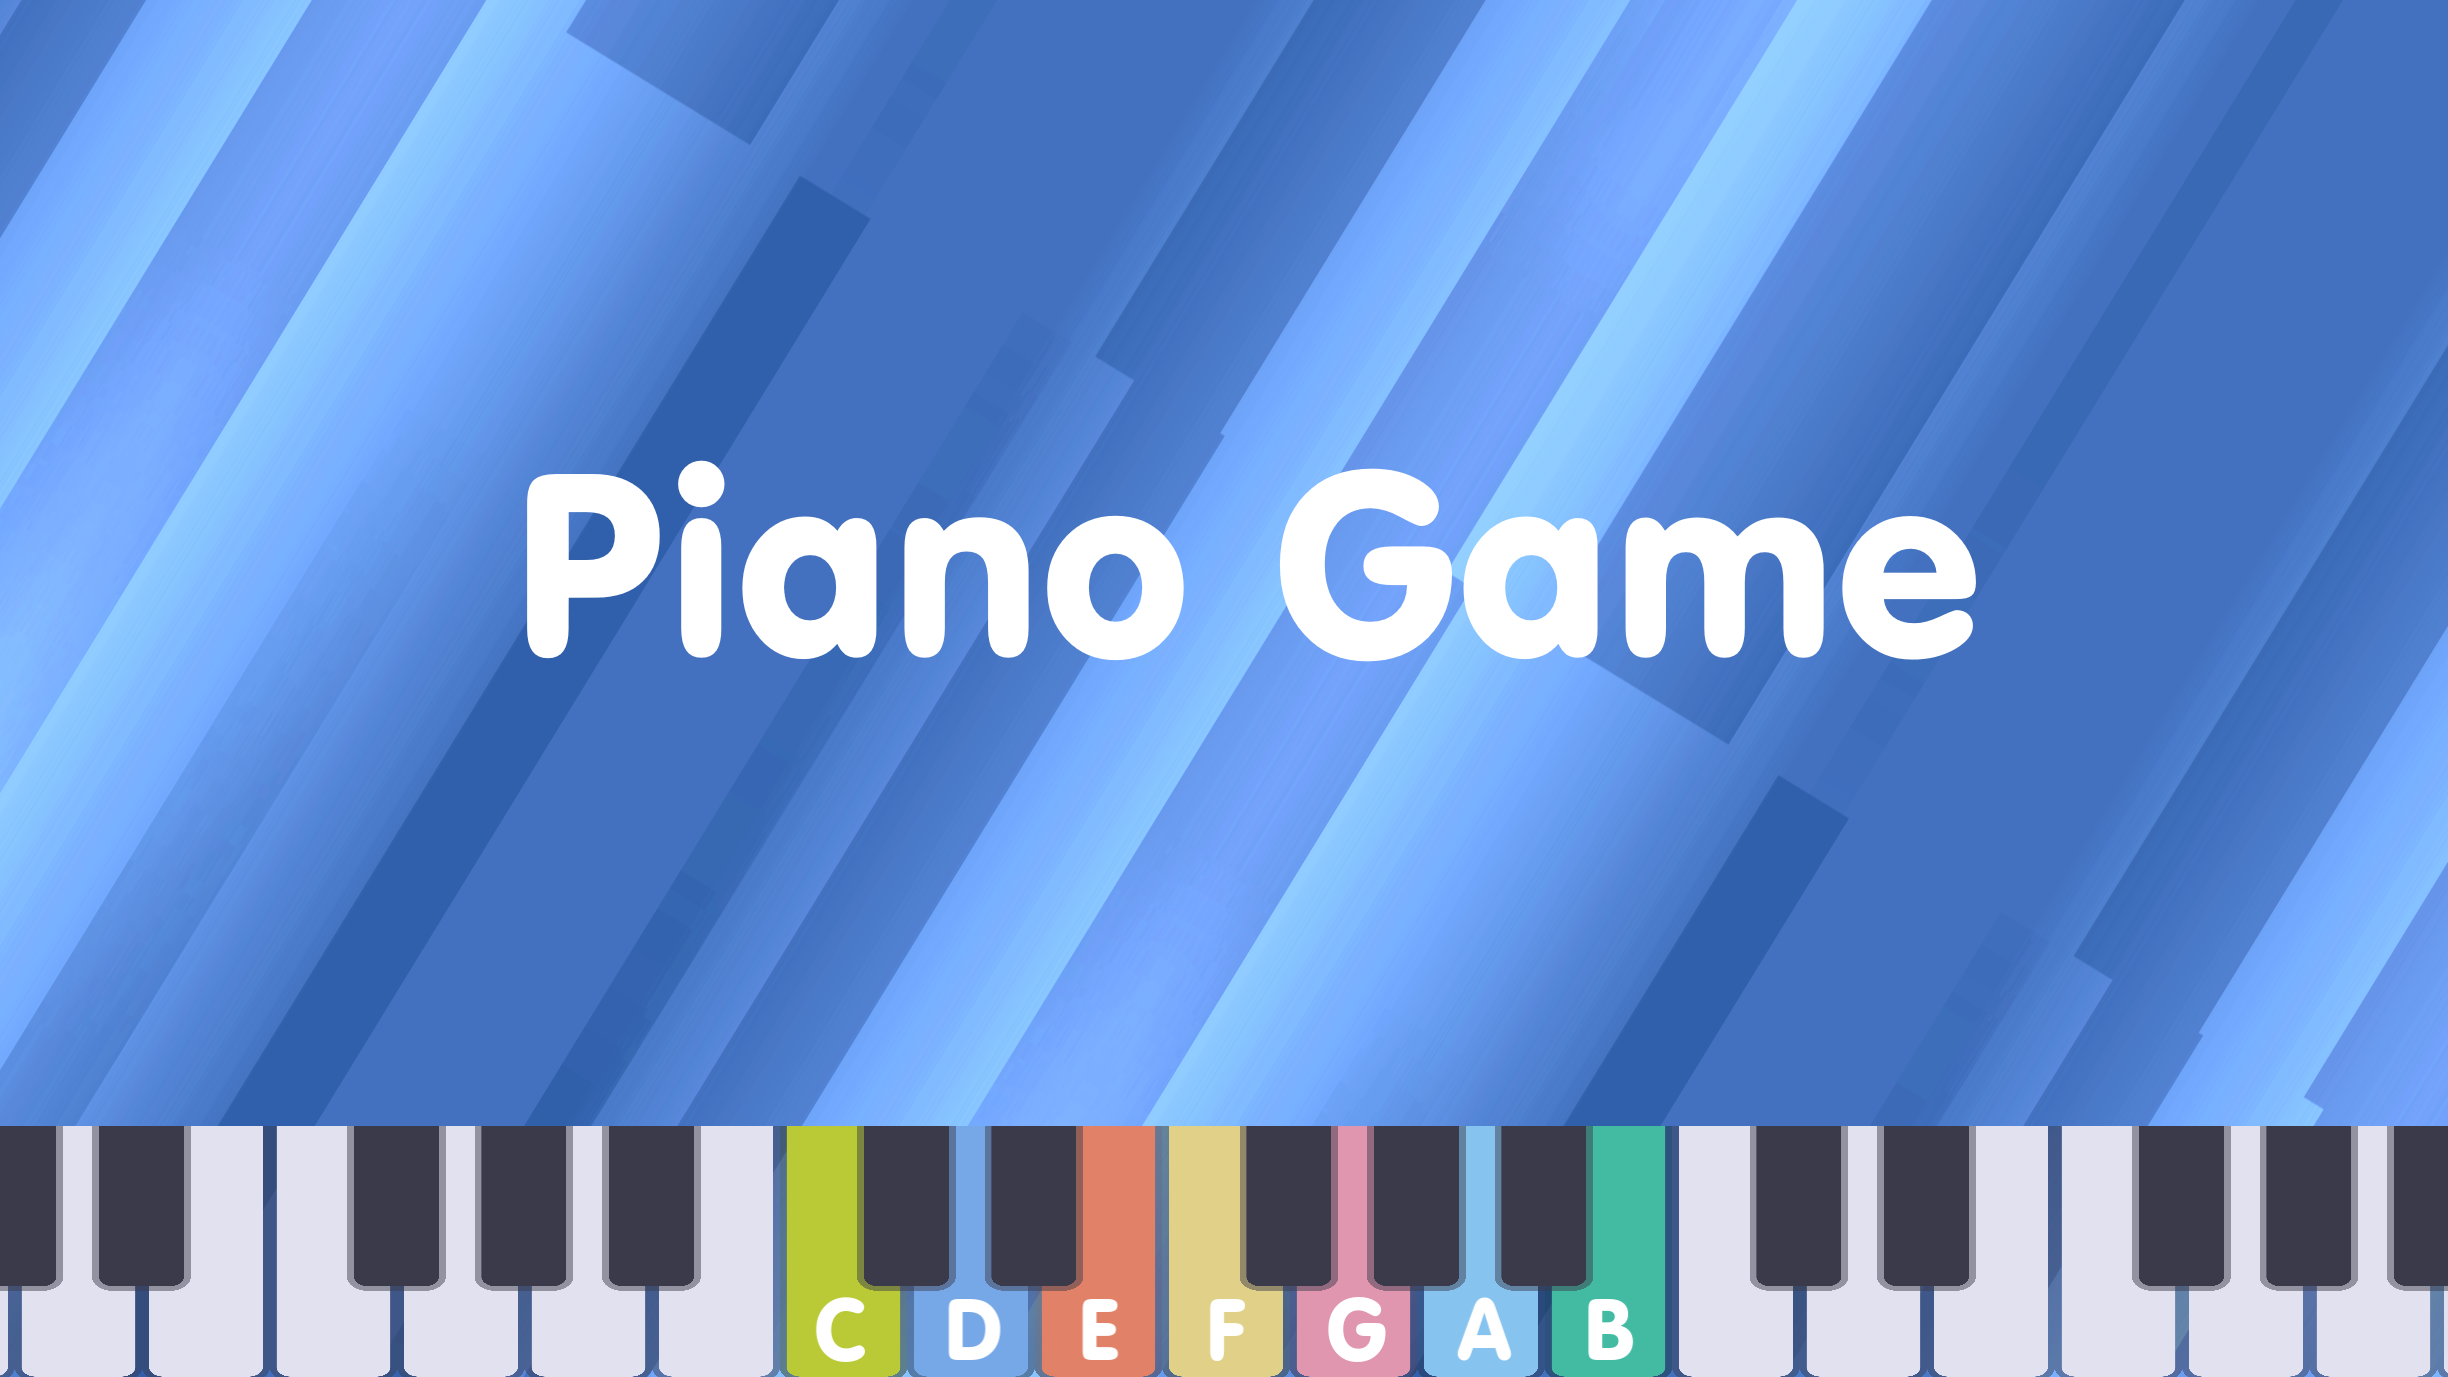 Piano Game (Honours Project)